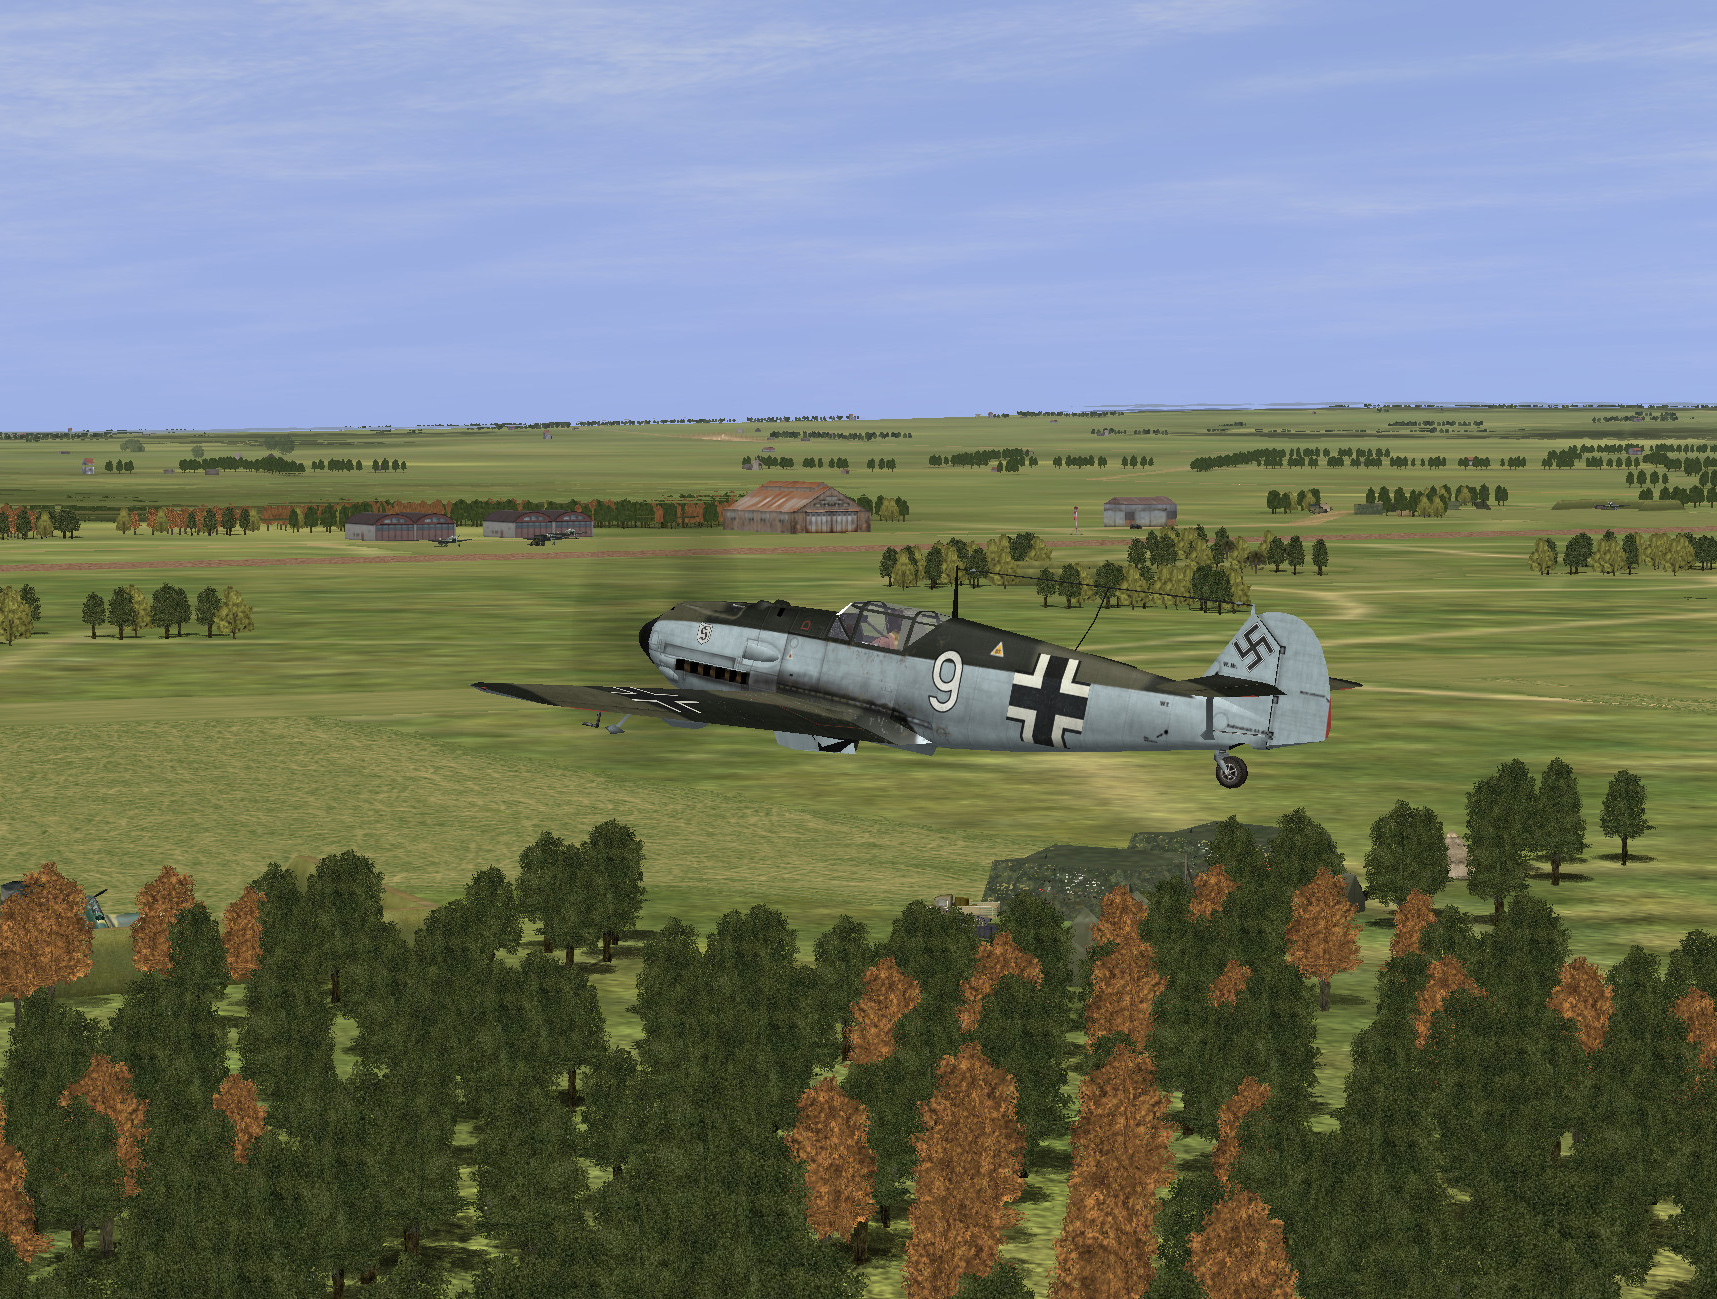 Netherlands 05-1940 Bf109 on approach of Dutch airbase